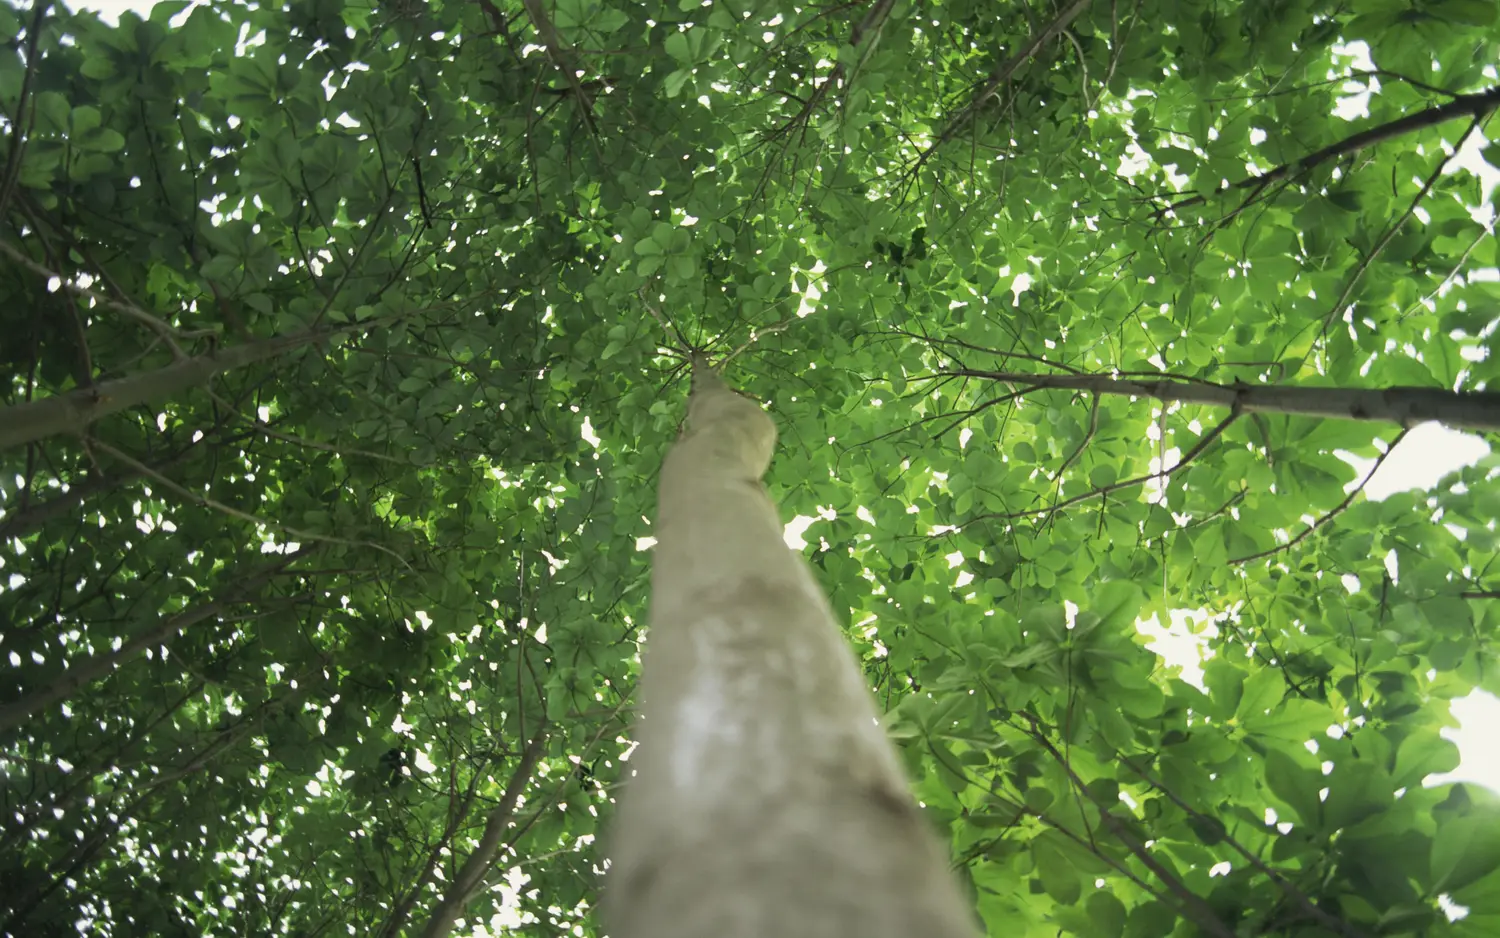 worm's eye view of a tree